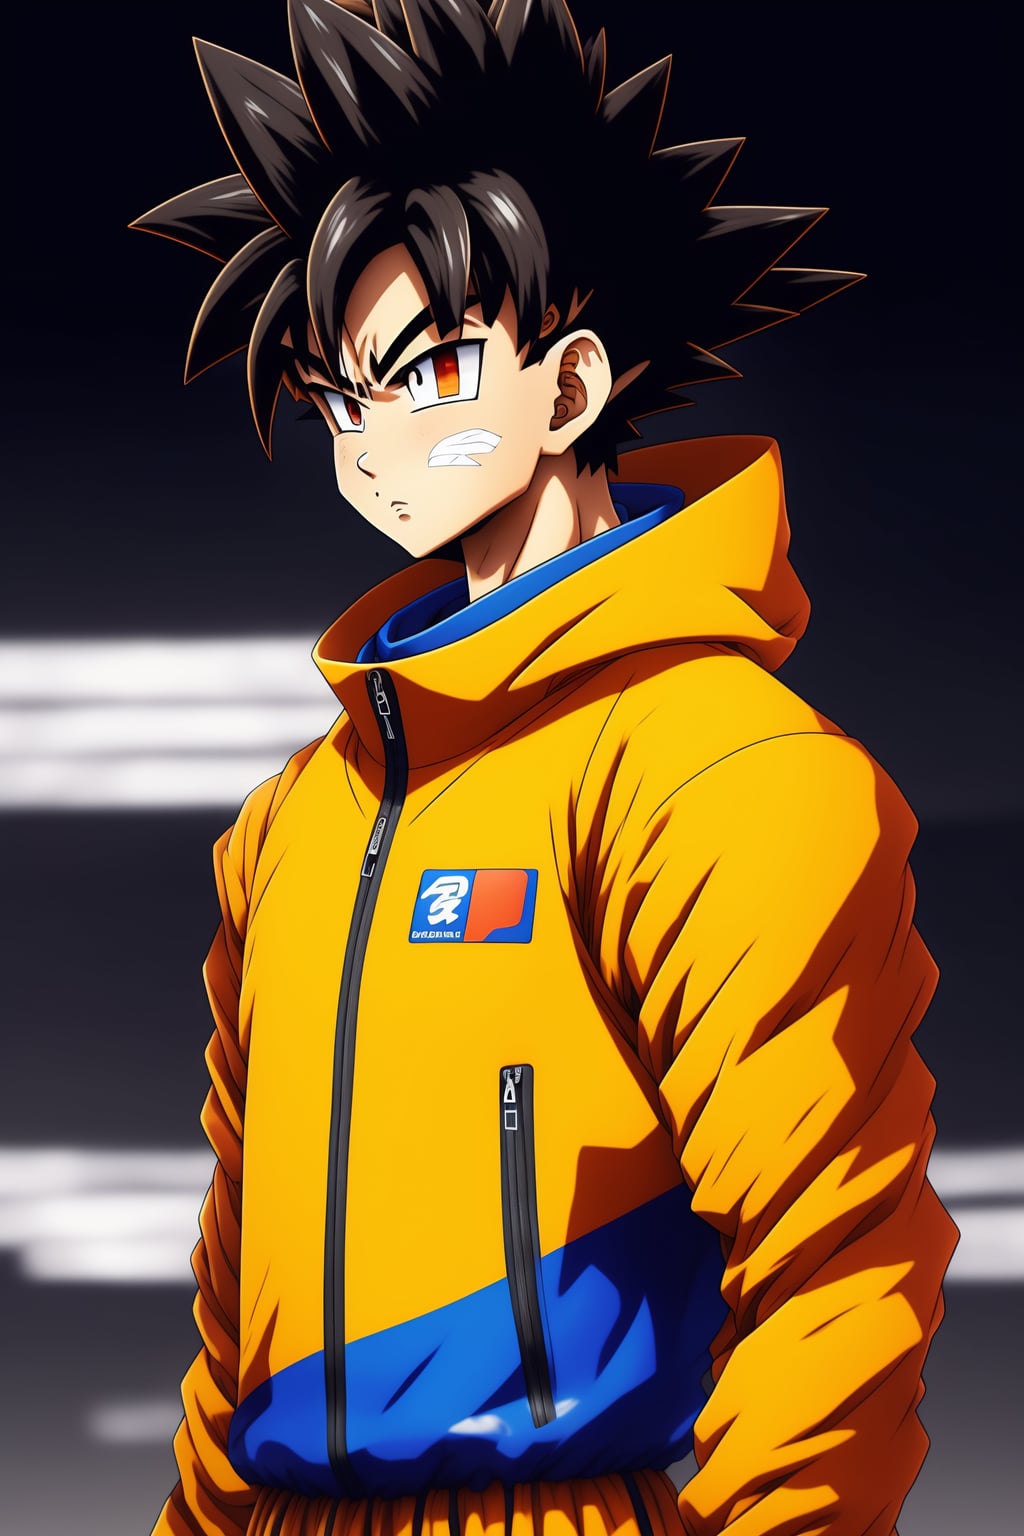 Lexica - goku from dragon ball z as a android in battle with gohan from  dragon ball z gt